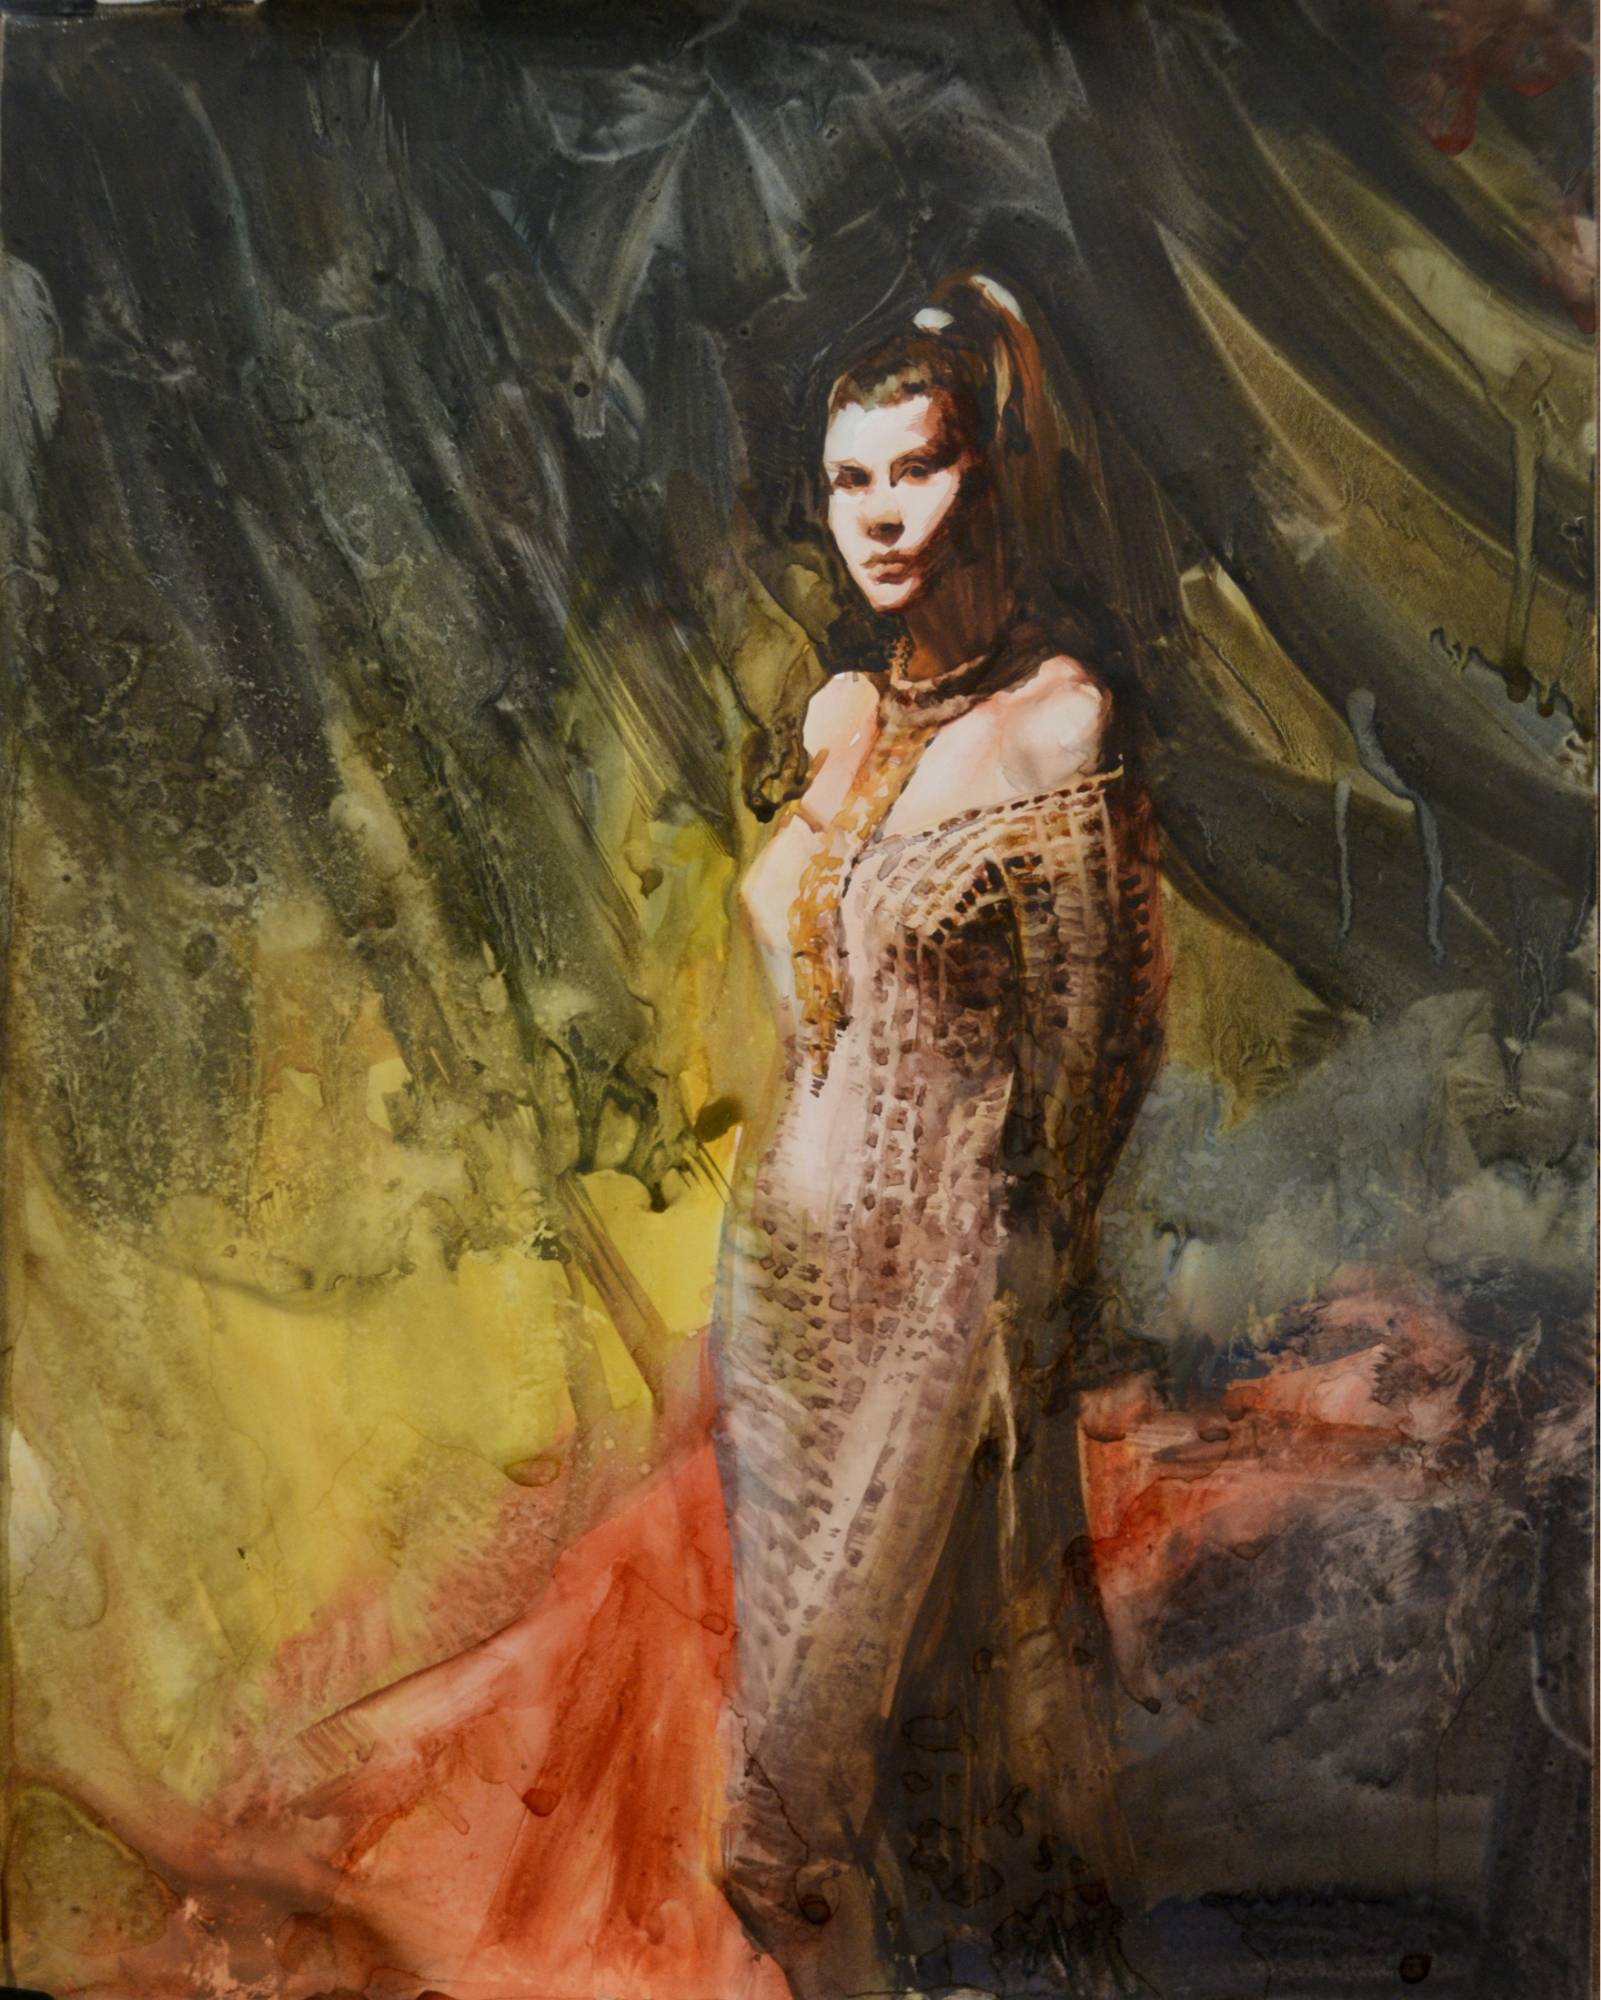 watercolor painting showing a female model wearing a textured dress standing with her hands behind her back, gazing at the viewer